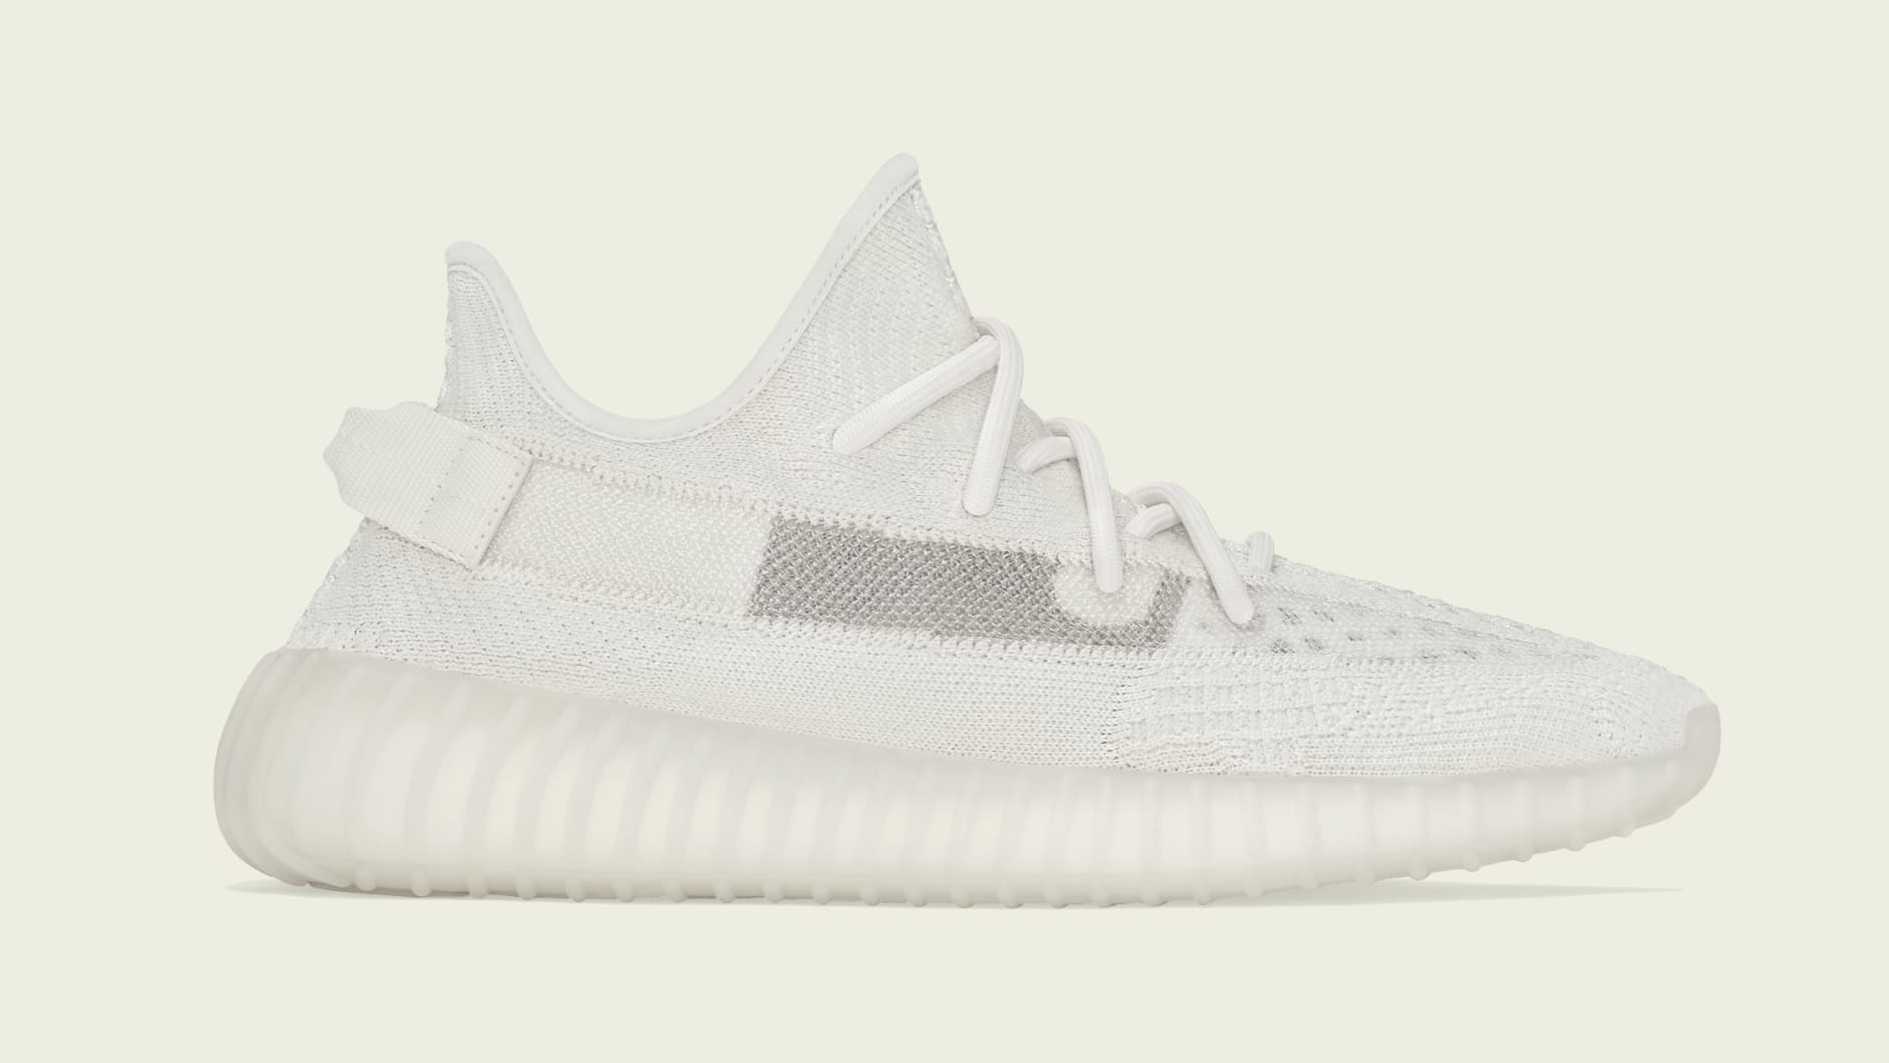 adidas Yeezy Boost 350 V2 Colorways, Release Dates, Pricing